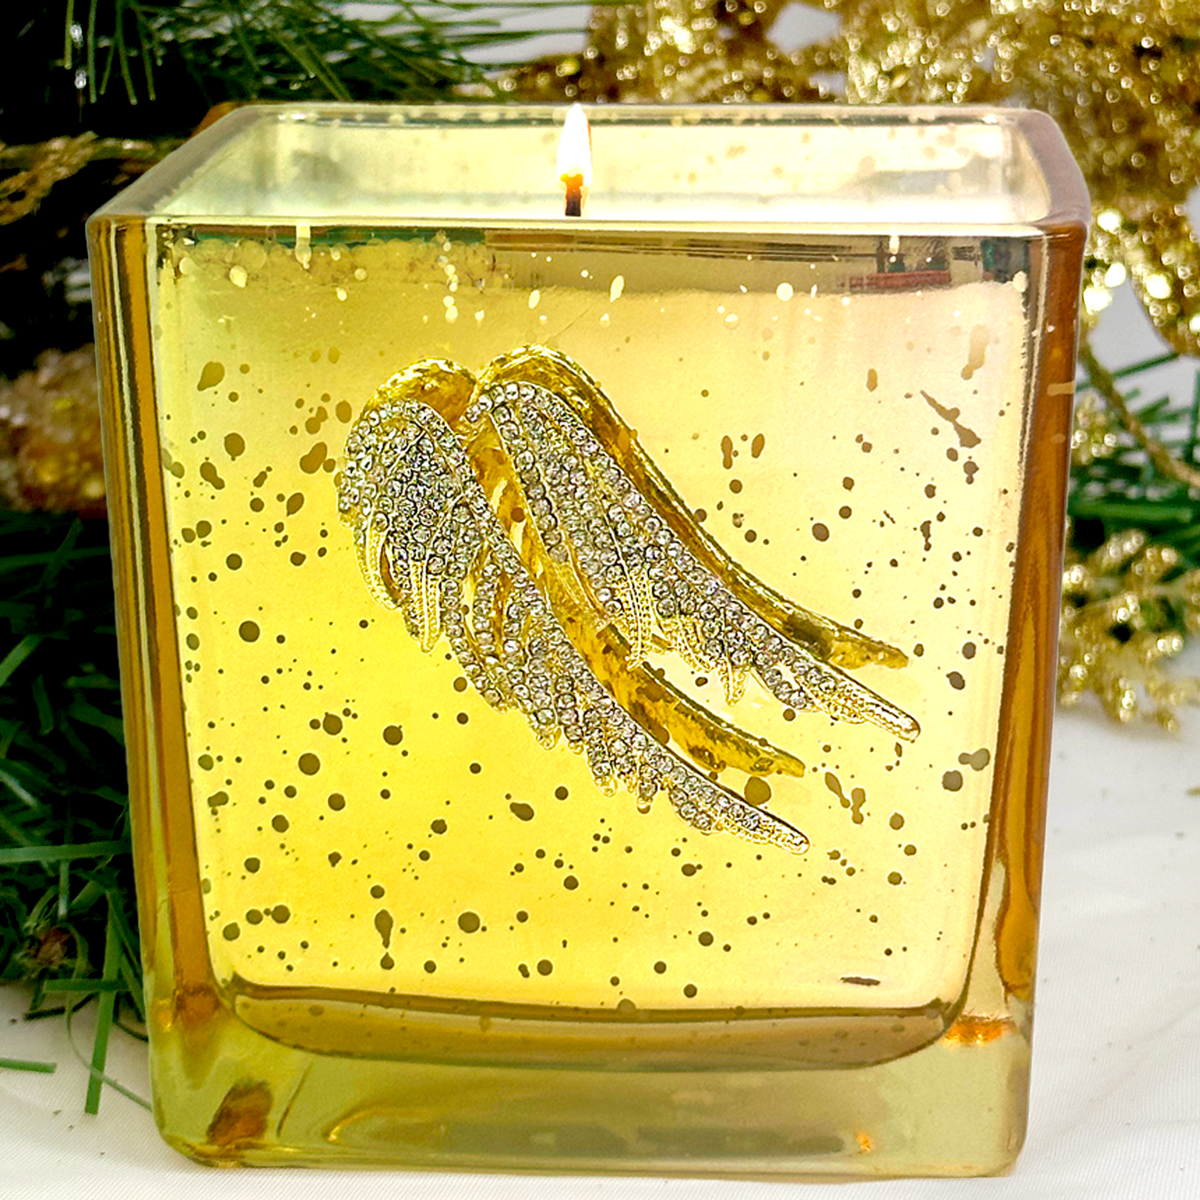 MERCURY GLASS CANDLE - GOLD RHINESTONE WINGS  "GIFTS OF THE MAGI"